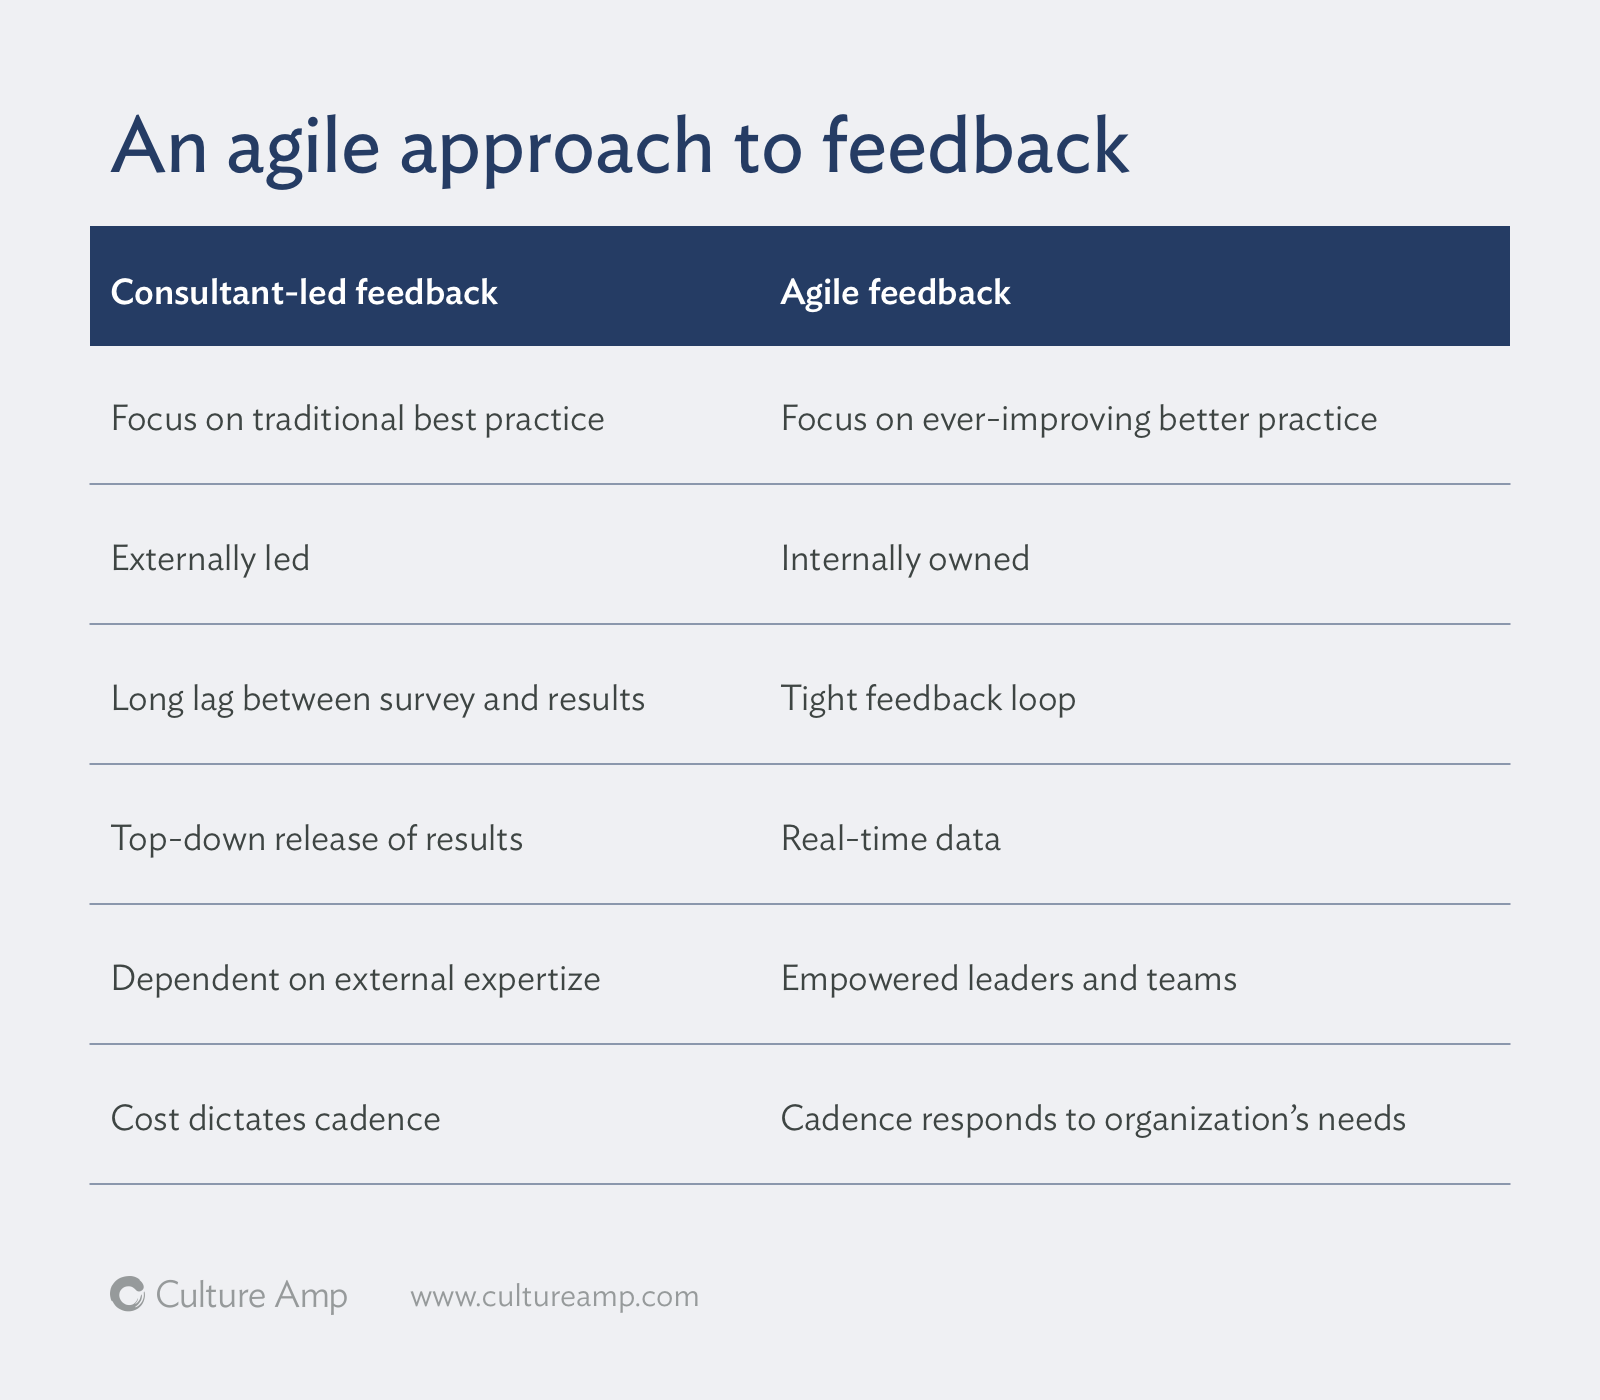 Side by side listing of difference between consultant-led feedback and agile feedback